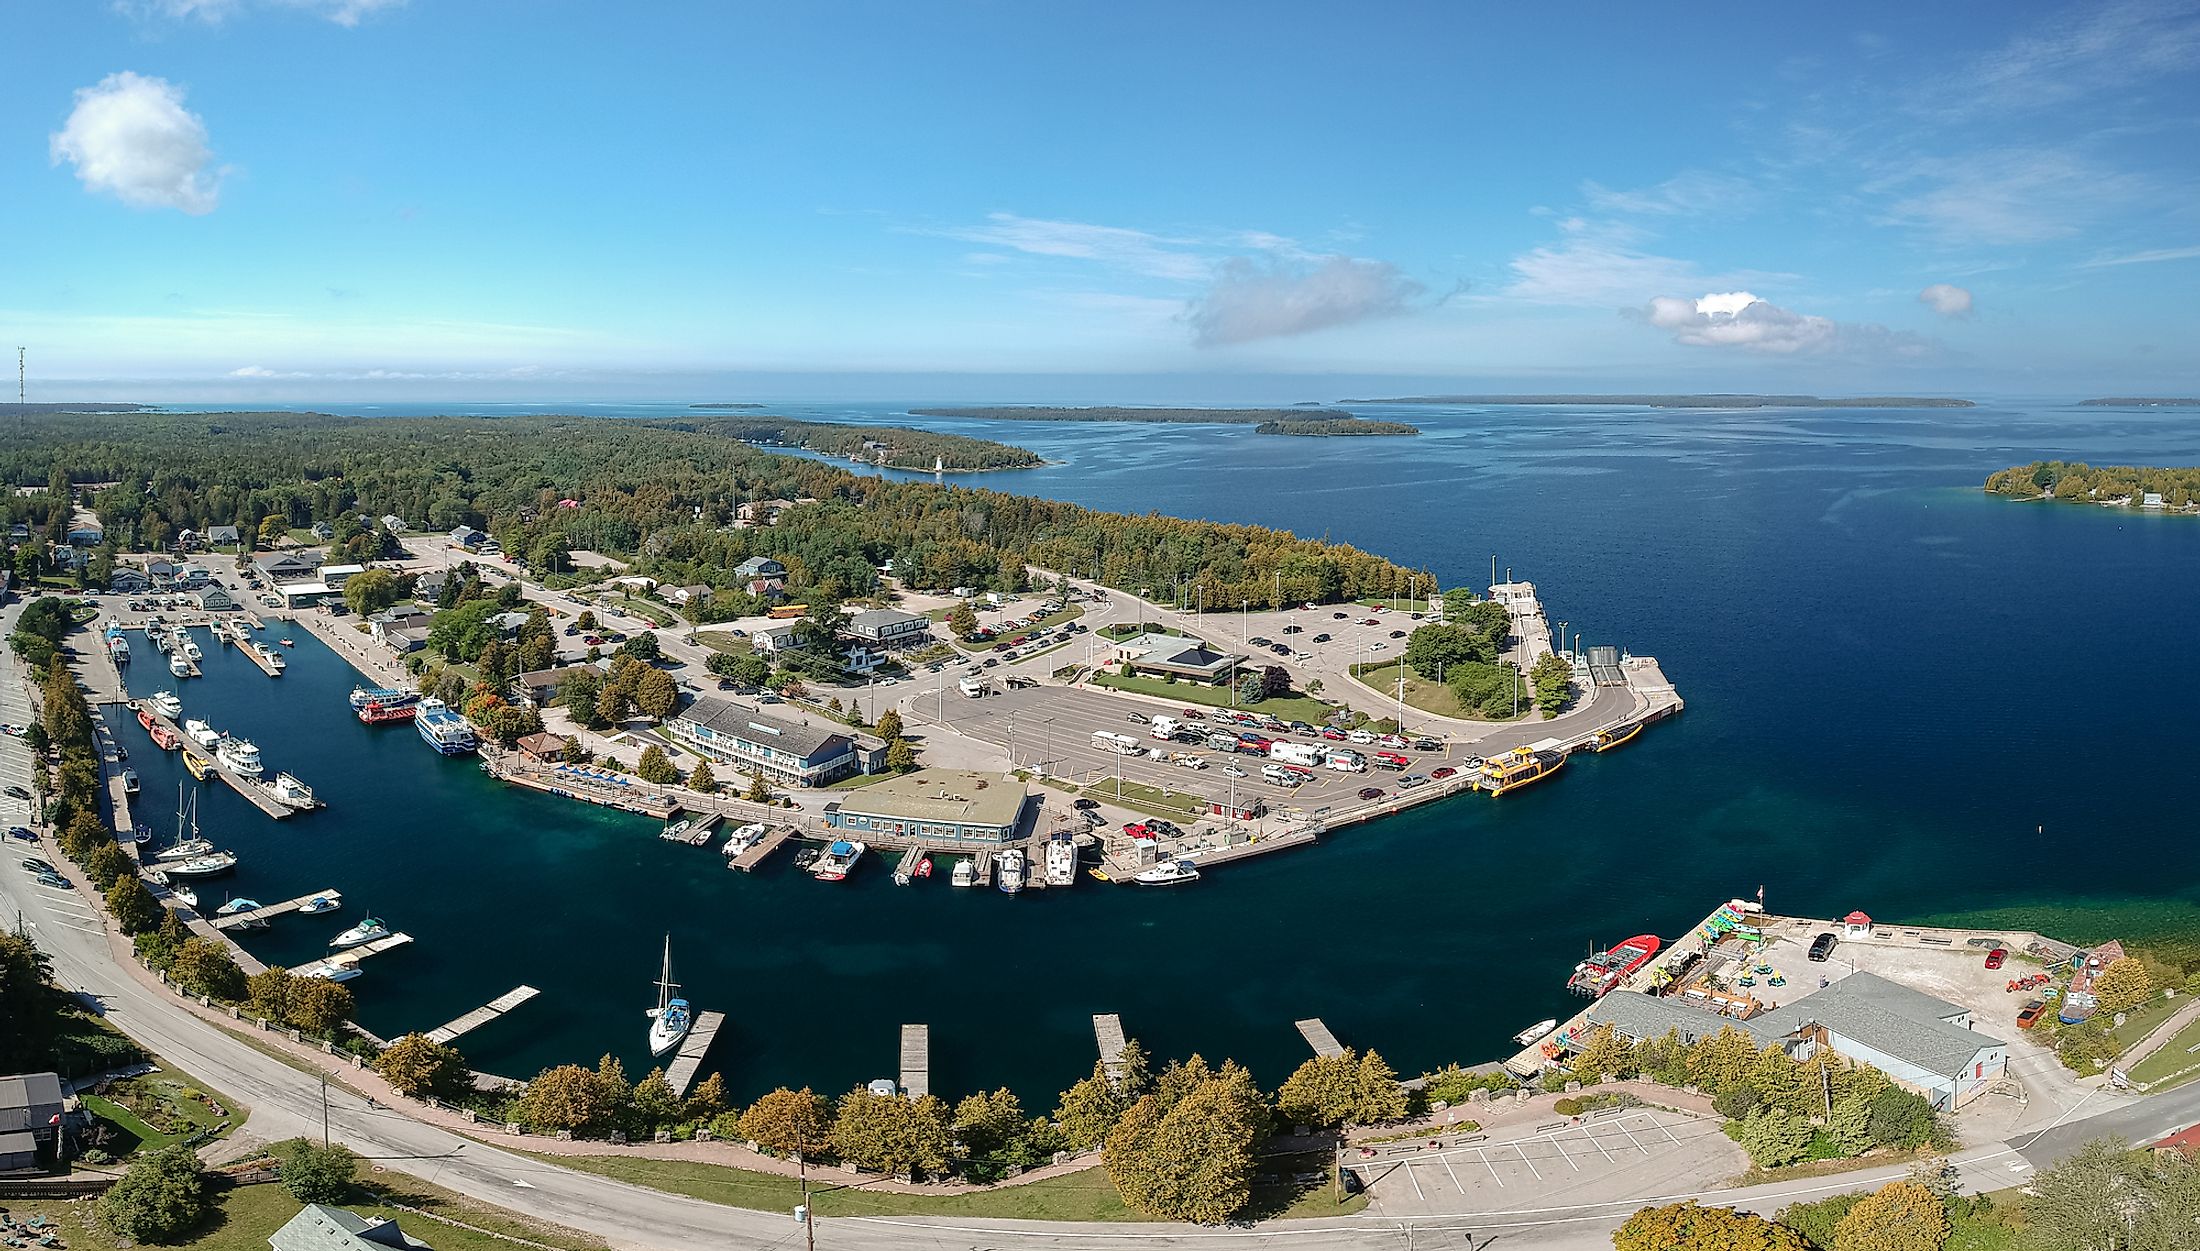 Aerial view of the ferry terminal and harbor port in Tobermory. Editorial credit: Elena Berd / Shutterstock.com